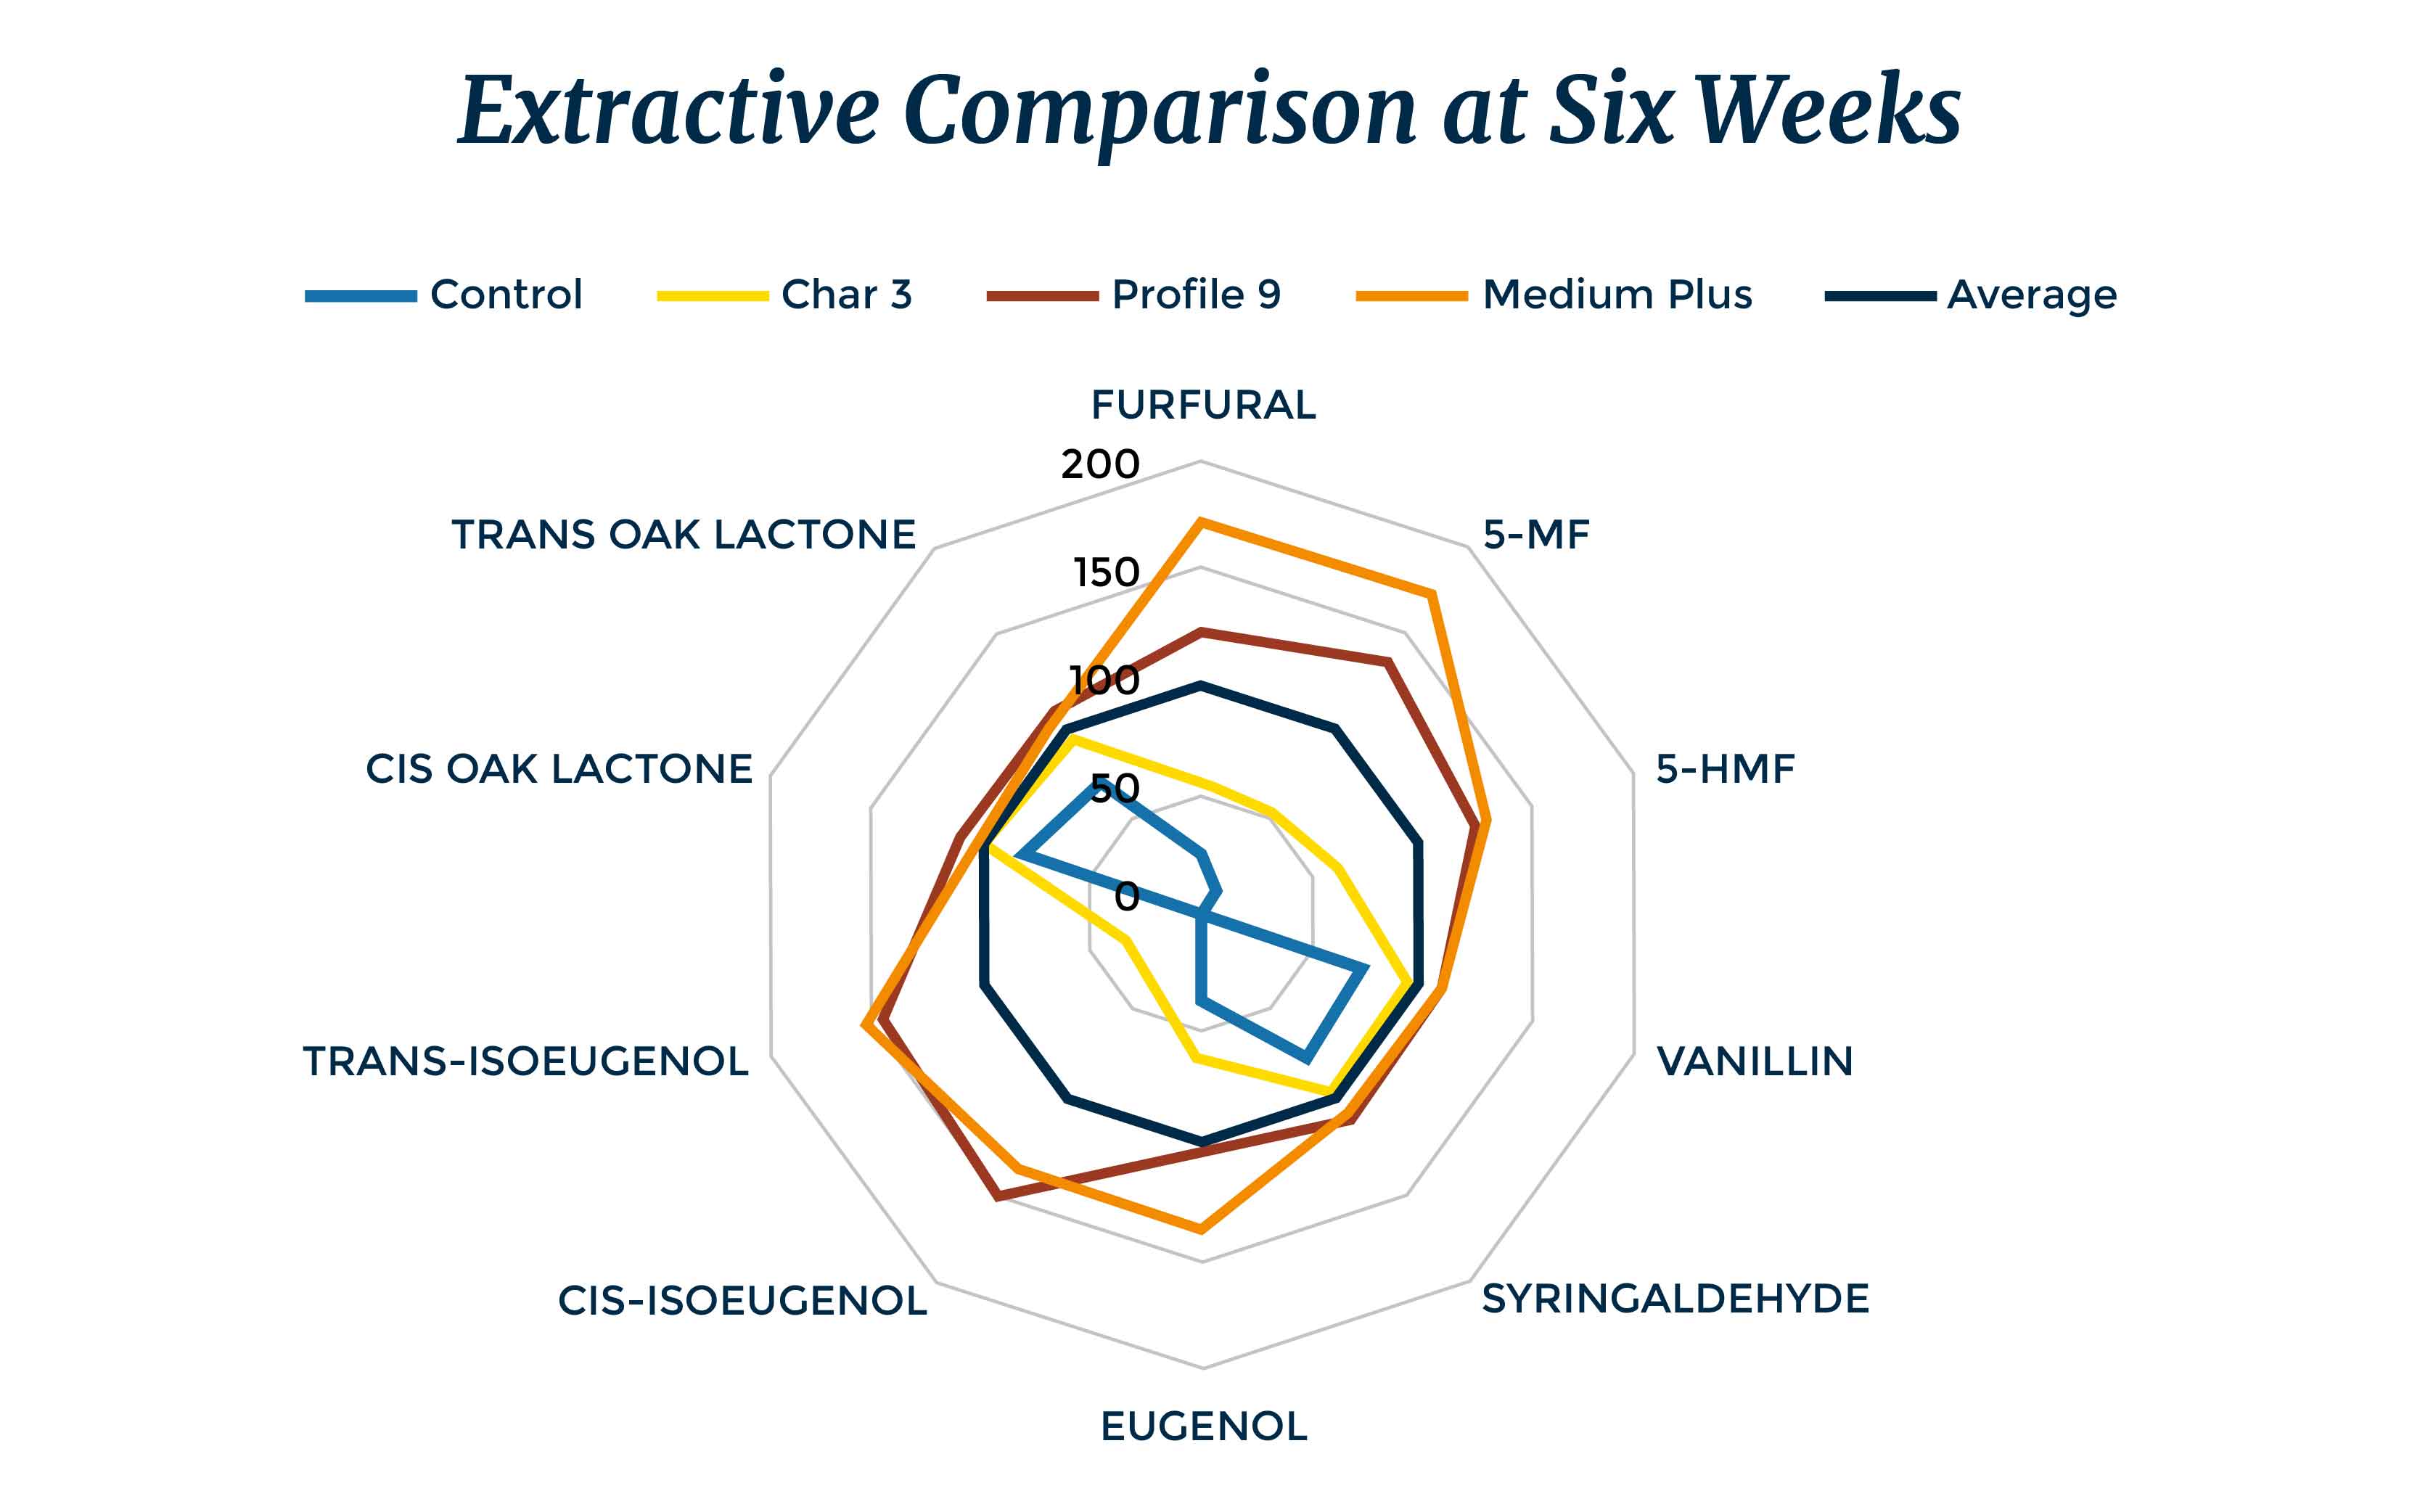 Extractive Comparison at Six Weeks